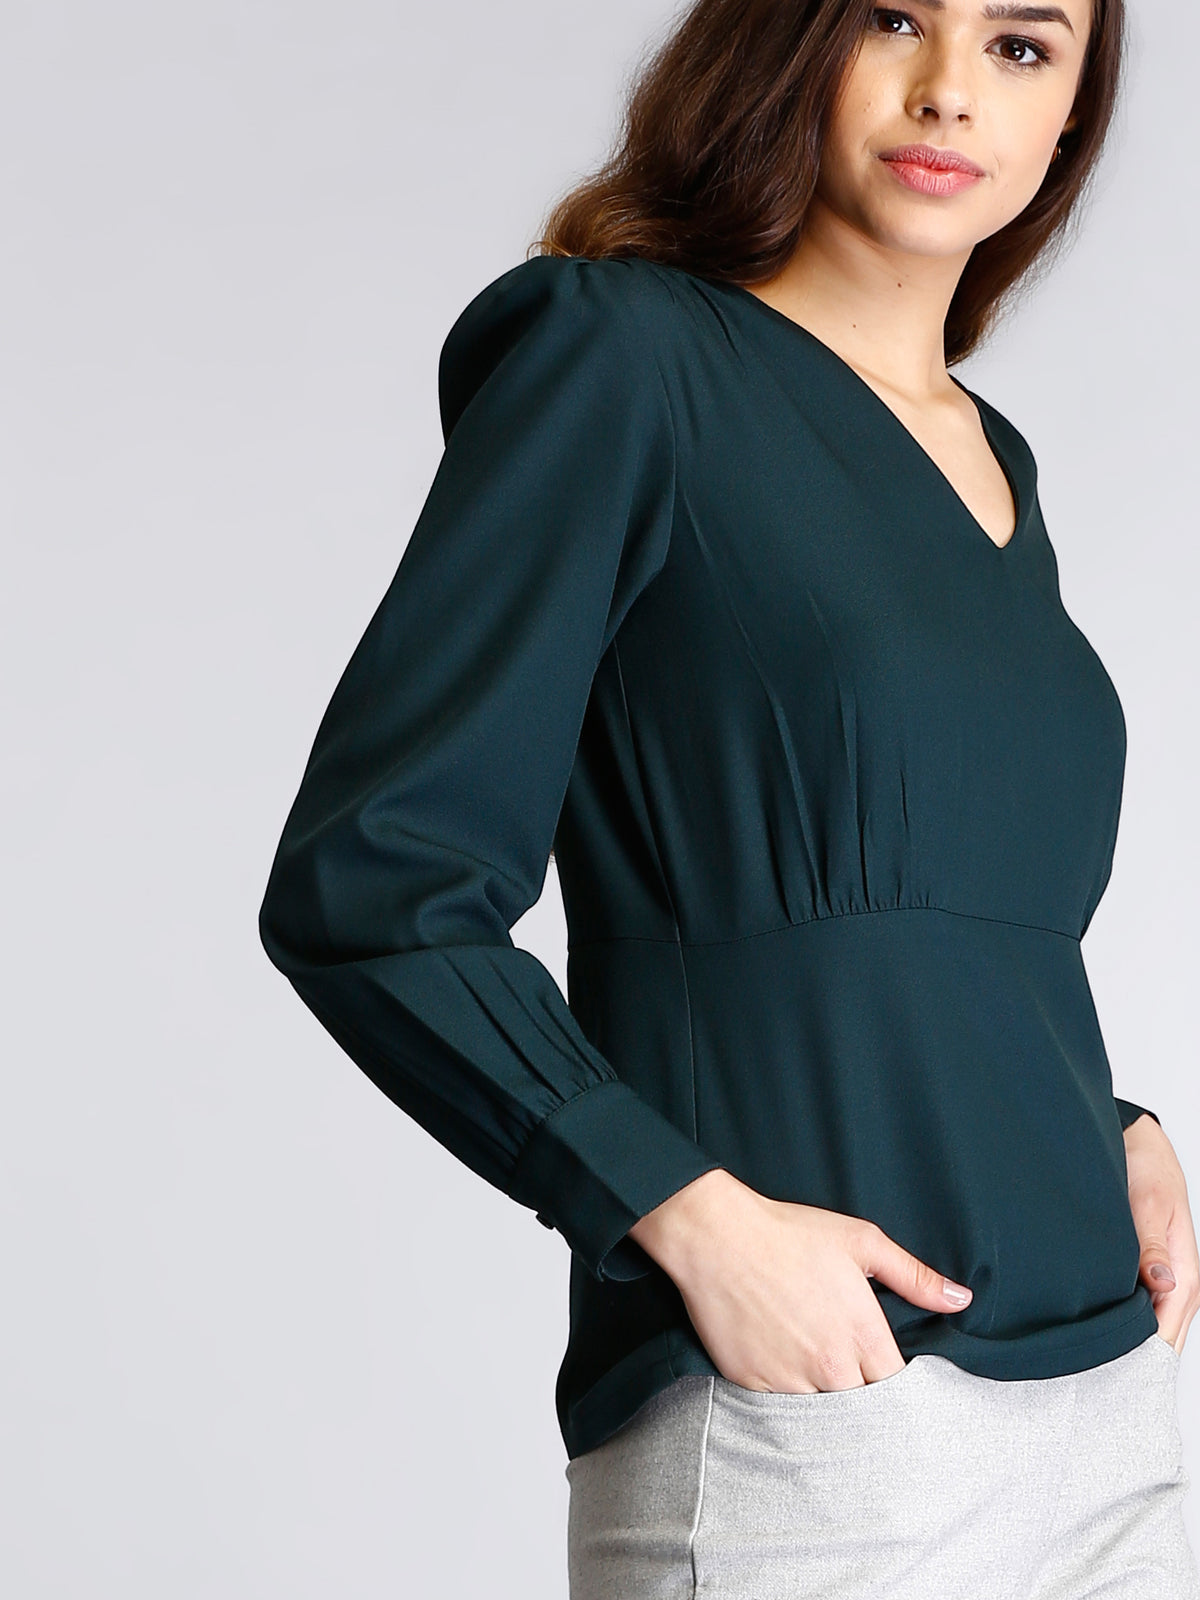 Empire Line Top With Gather Details - Bottle Green